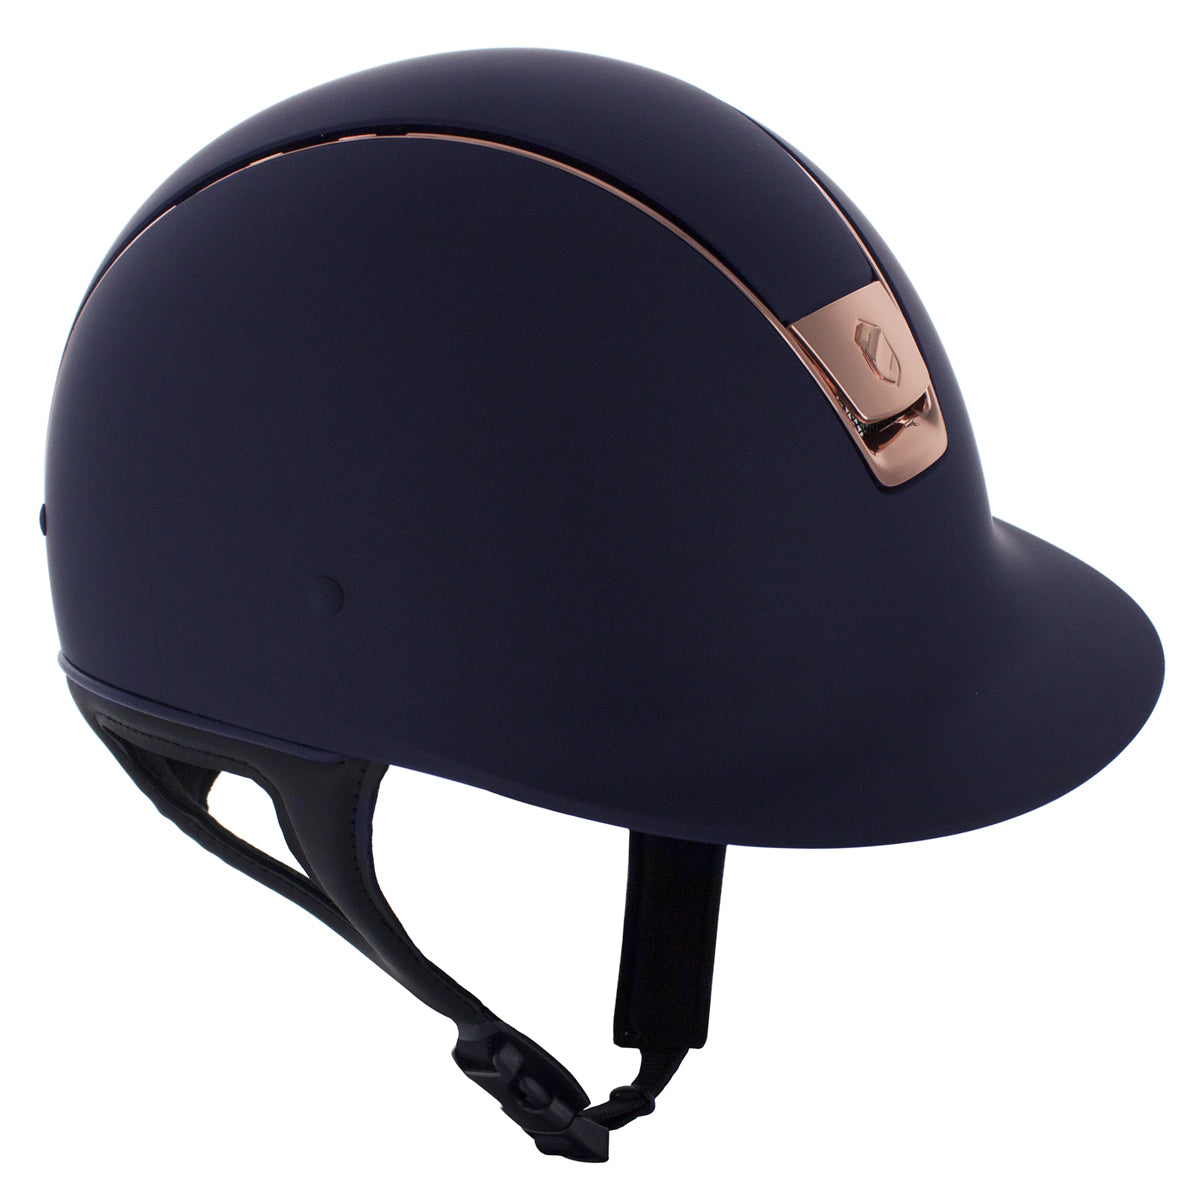 The Samshield Shadowmatt riding hat with rose gold trim.  Available in Black and Navy.